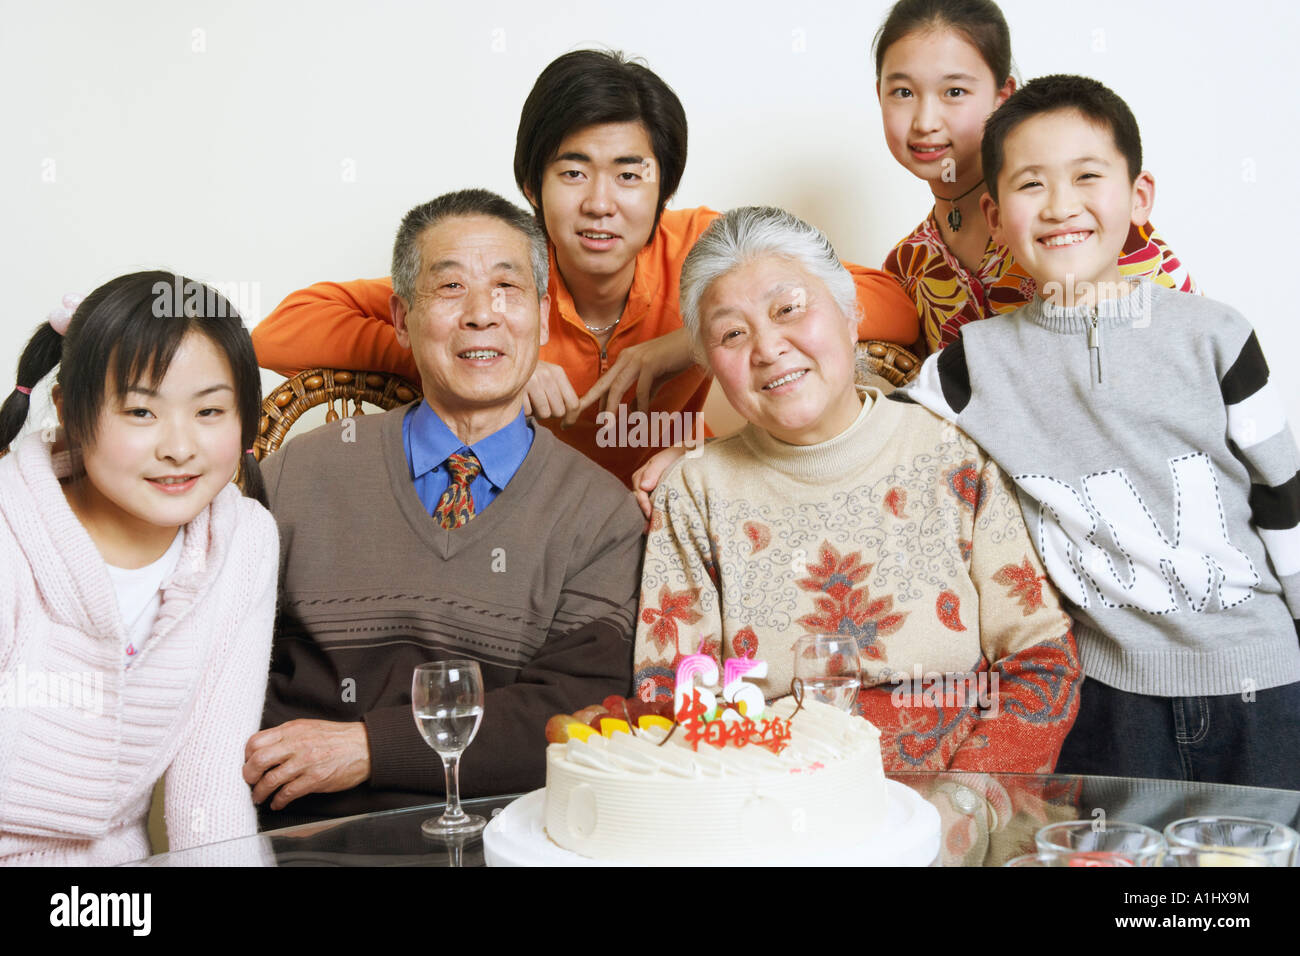 Portrait of a family at a birthday party Stock Photo